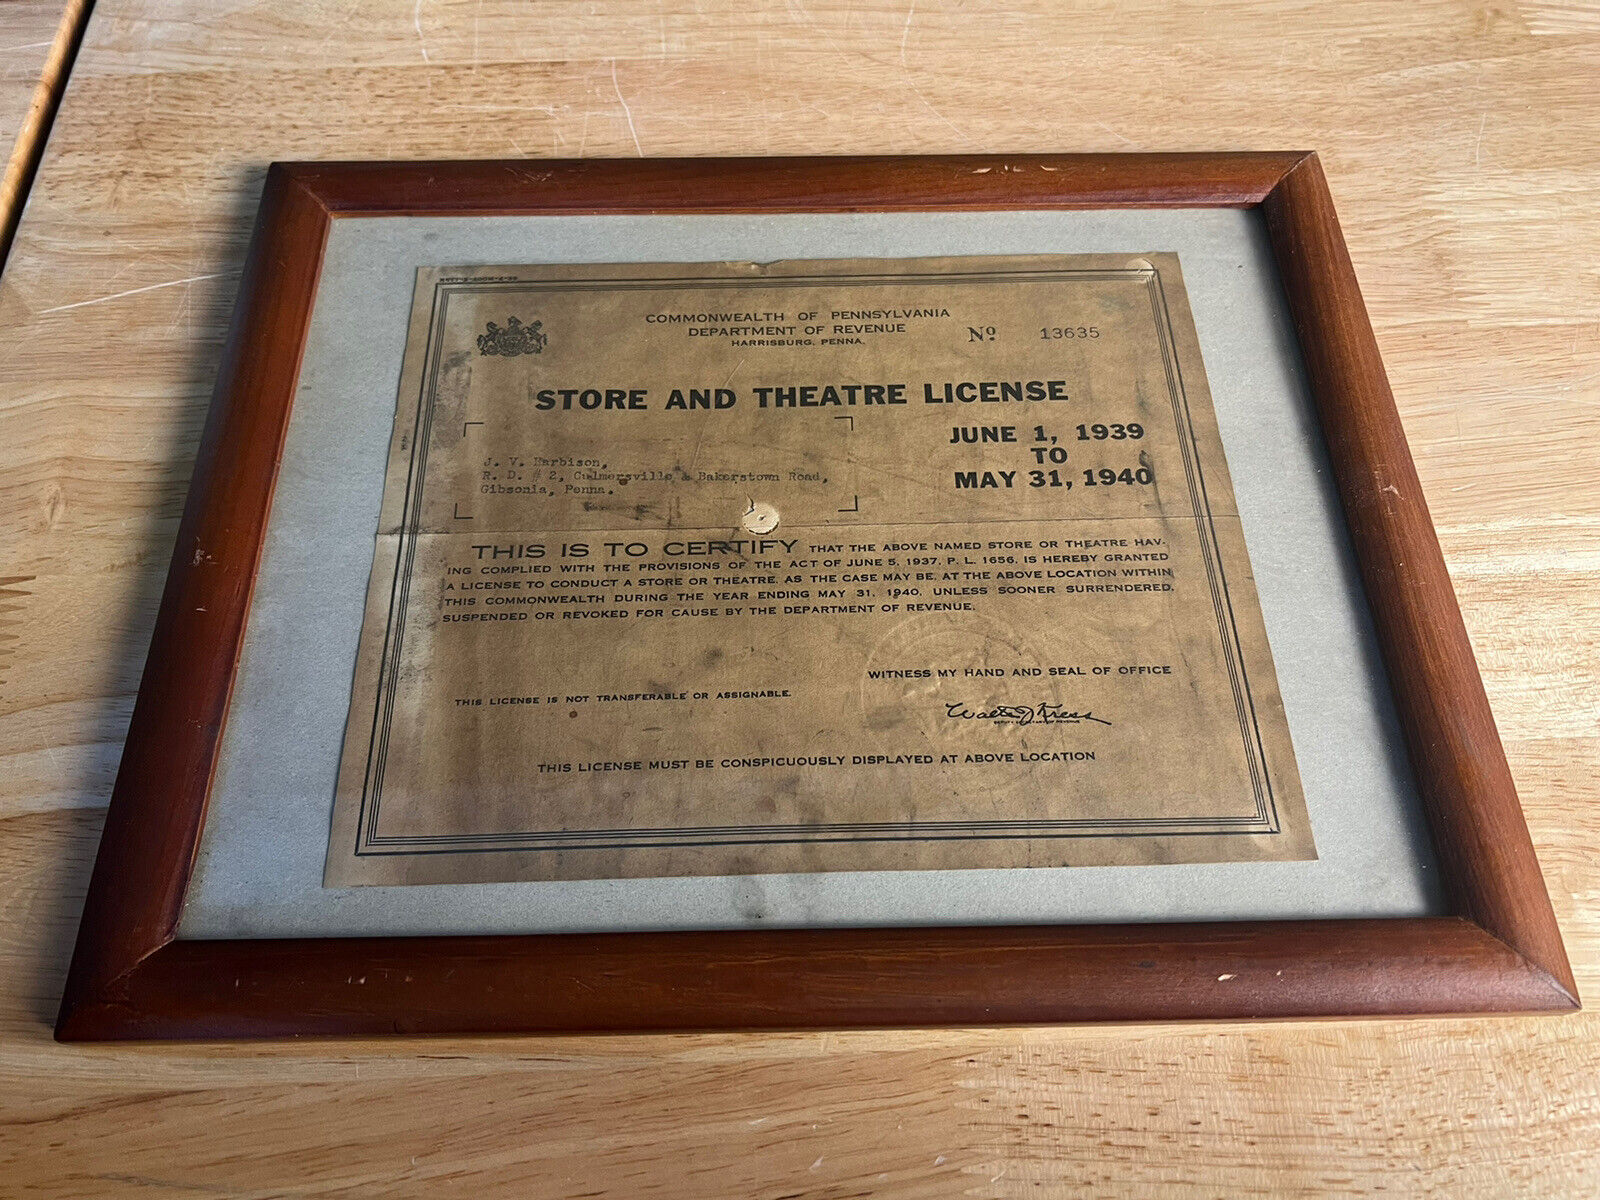 ANTIQUE 1939  STORE AND THEATER LICENSE FROM THE COMMONWEALTH OF PENNSYLVANIA 